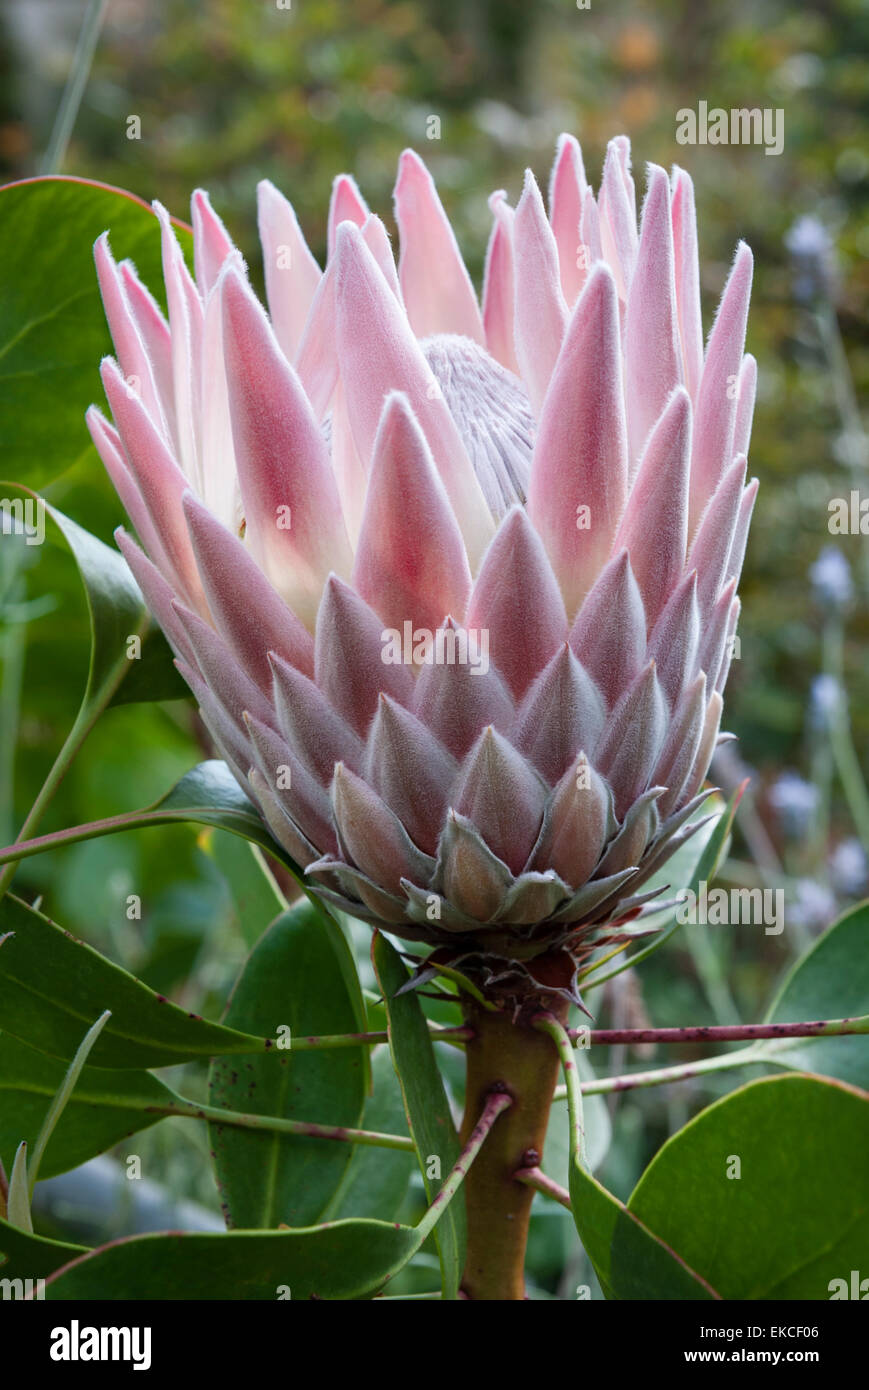 The National Botanic Garden of Wales, Llanarthney, Wales, UK. A South African Protea flowering in the Great Glasshouse Stock Photo